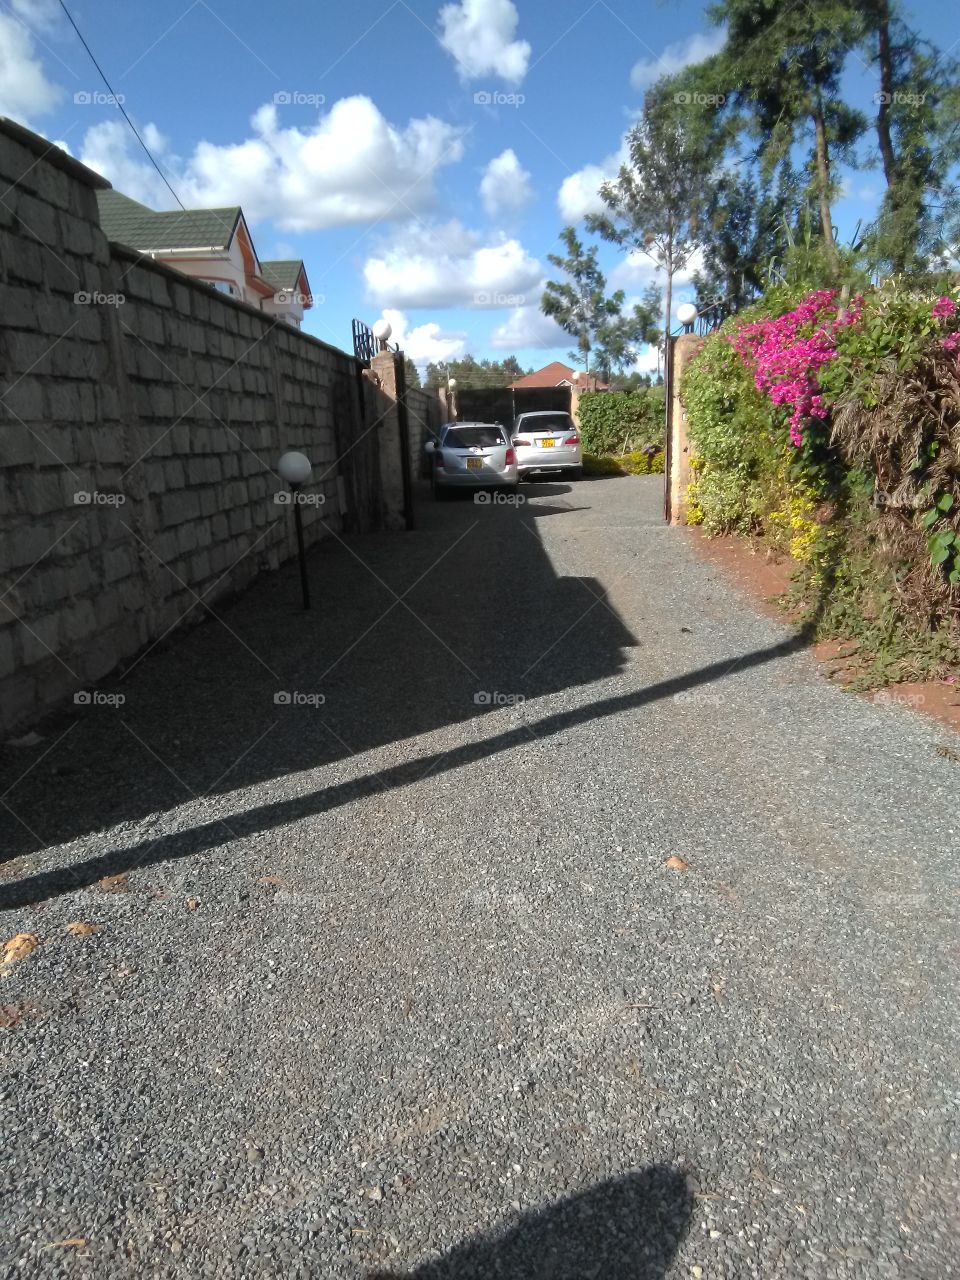 A beautifully designed driveway and a flowered hedge at the entrance of a home compound in summer.